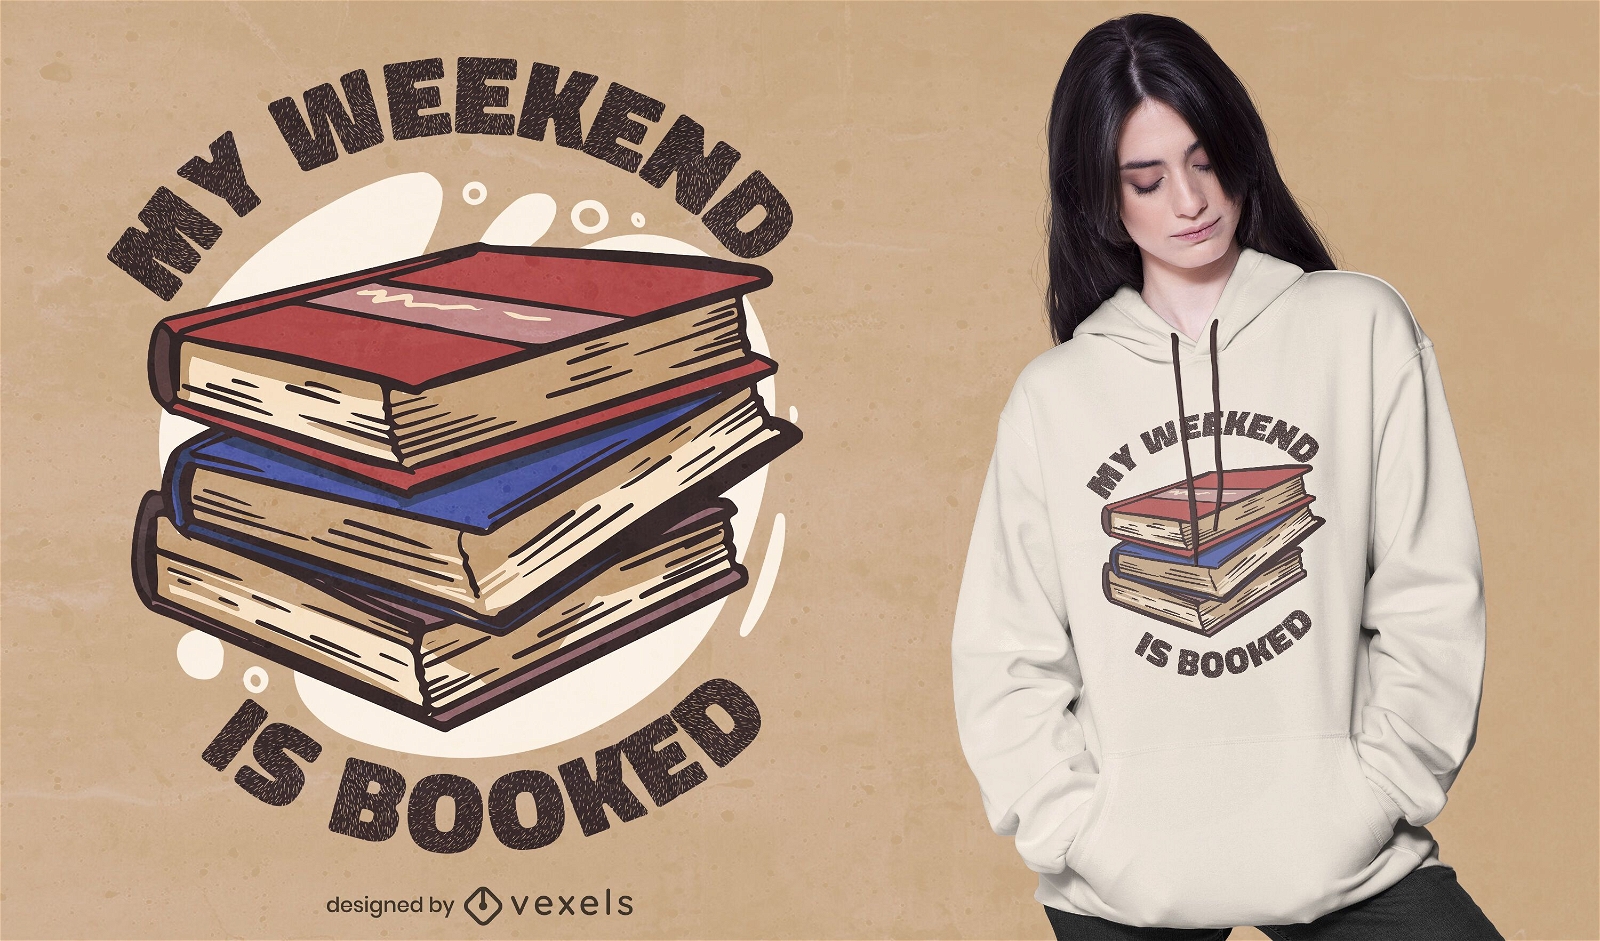 Weekend is booked t-shirt design